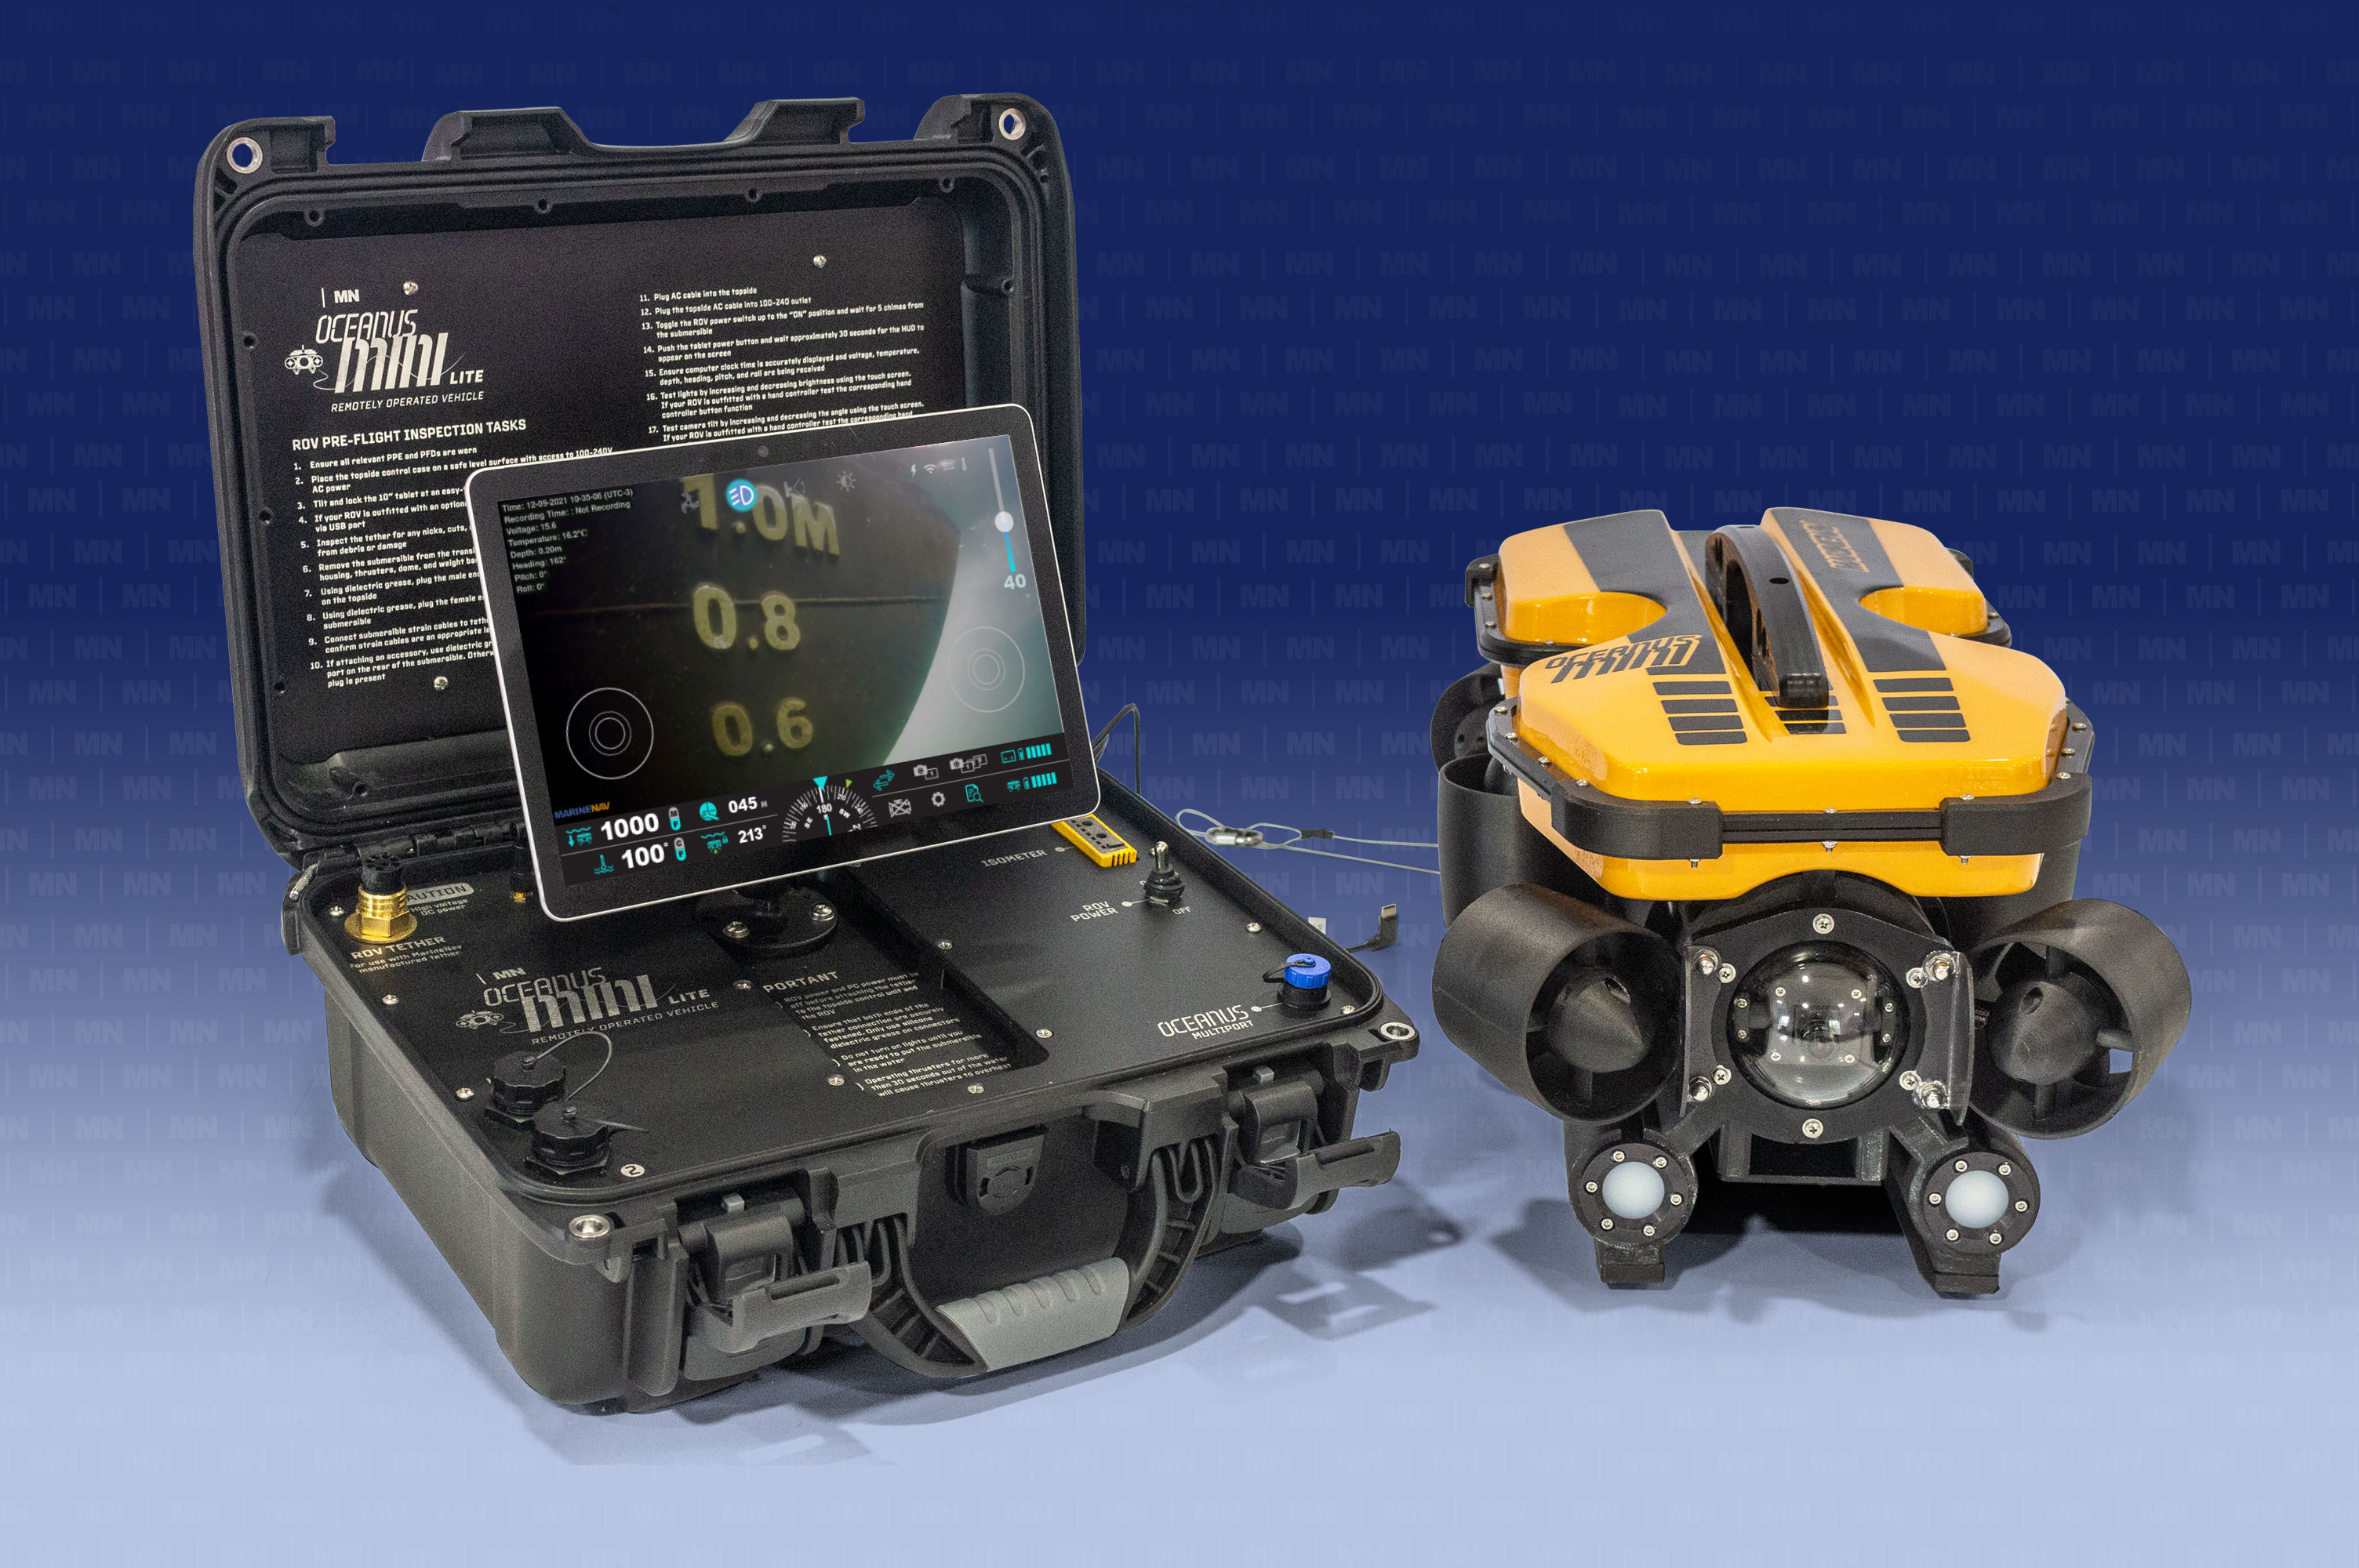 The Oceanus Mini/Pro topside is compatible with both Oceanus Mini and Pro ROVs and tether